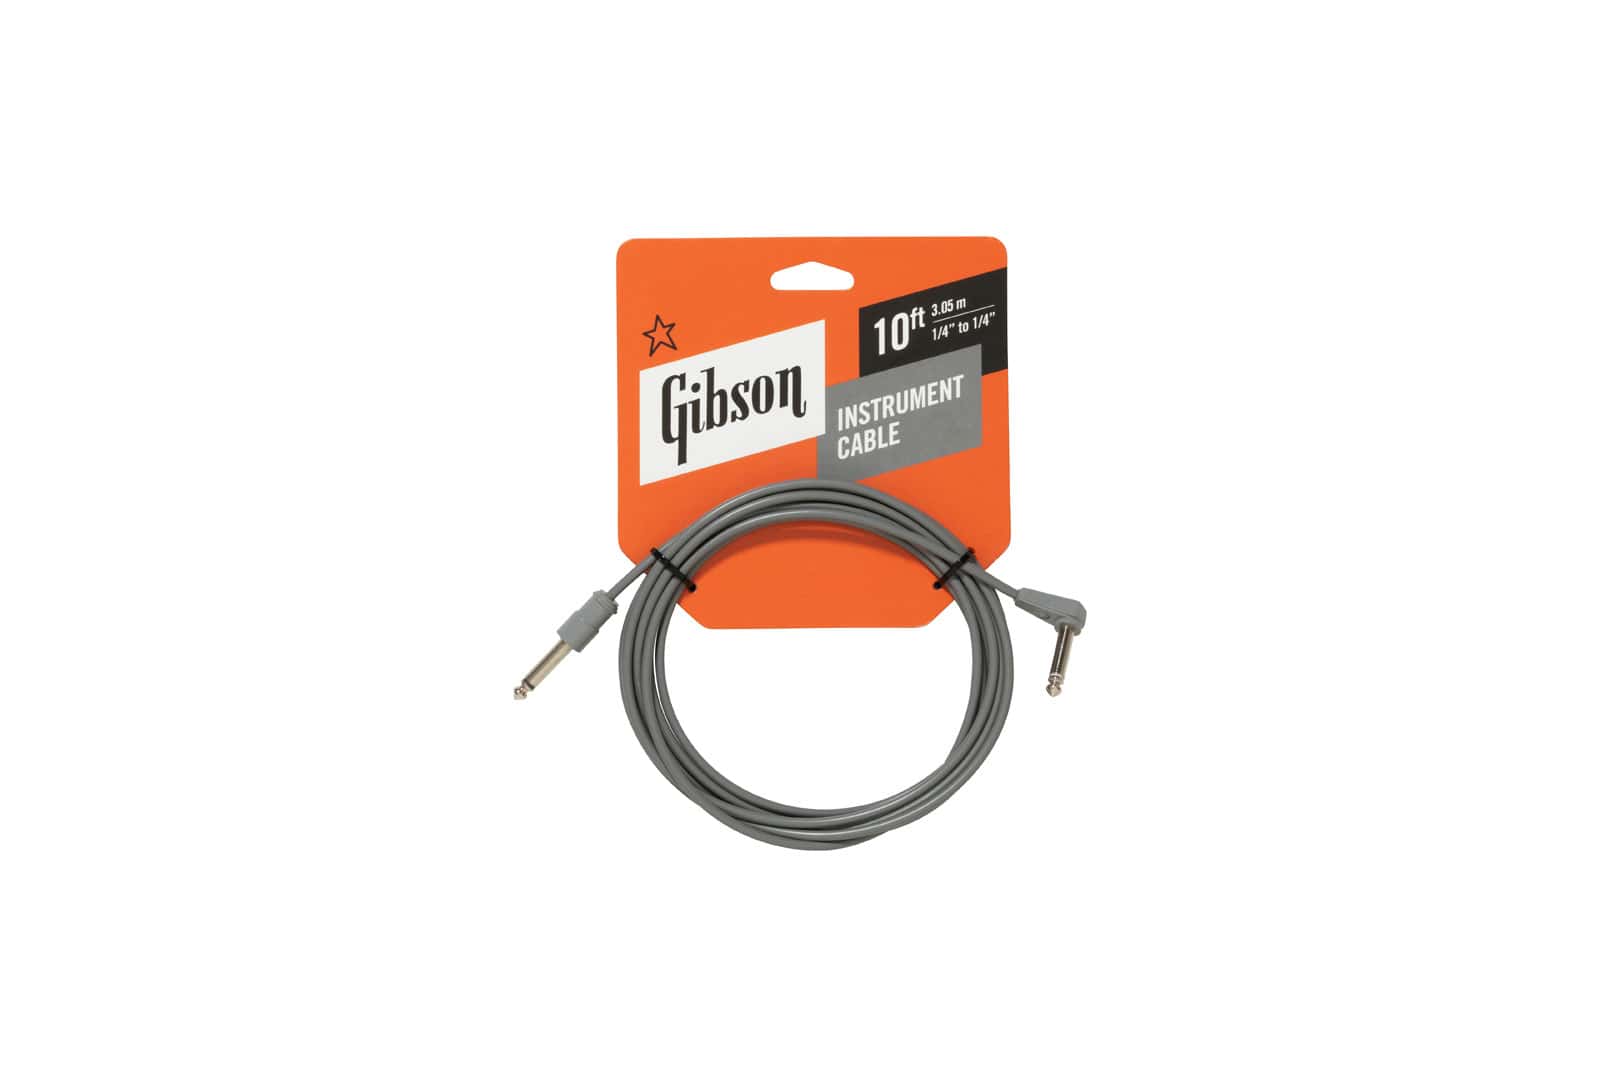 GIBSON ACCESSORIES VINTAGE ORIGINAL INSTRUMENT CABLE 10 FT.